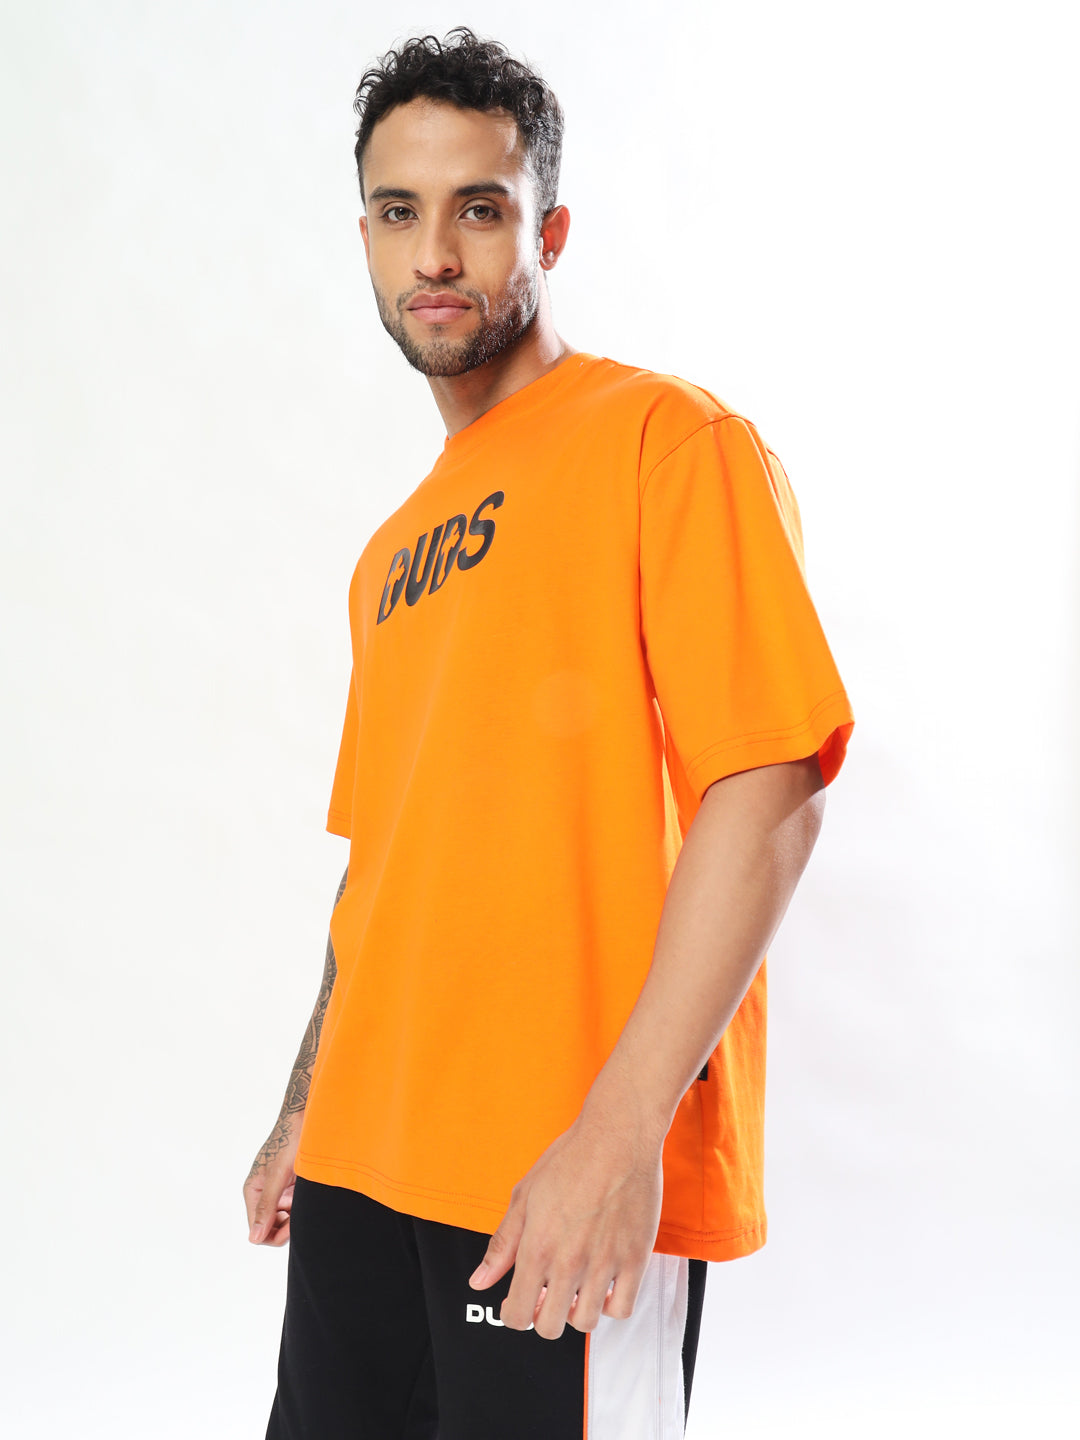 Only God Can Judge Me Over-Sized T-Shirt (Orange)